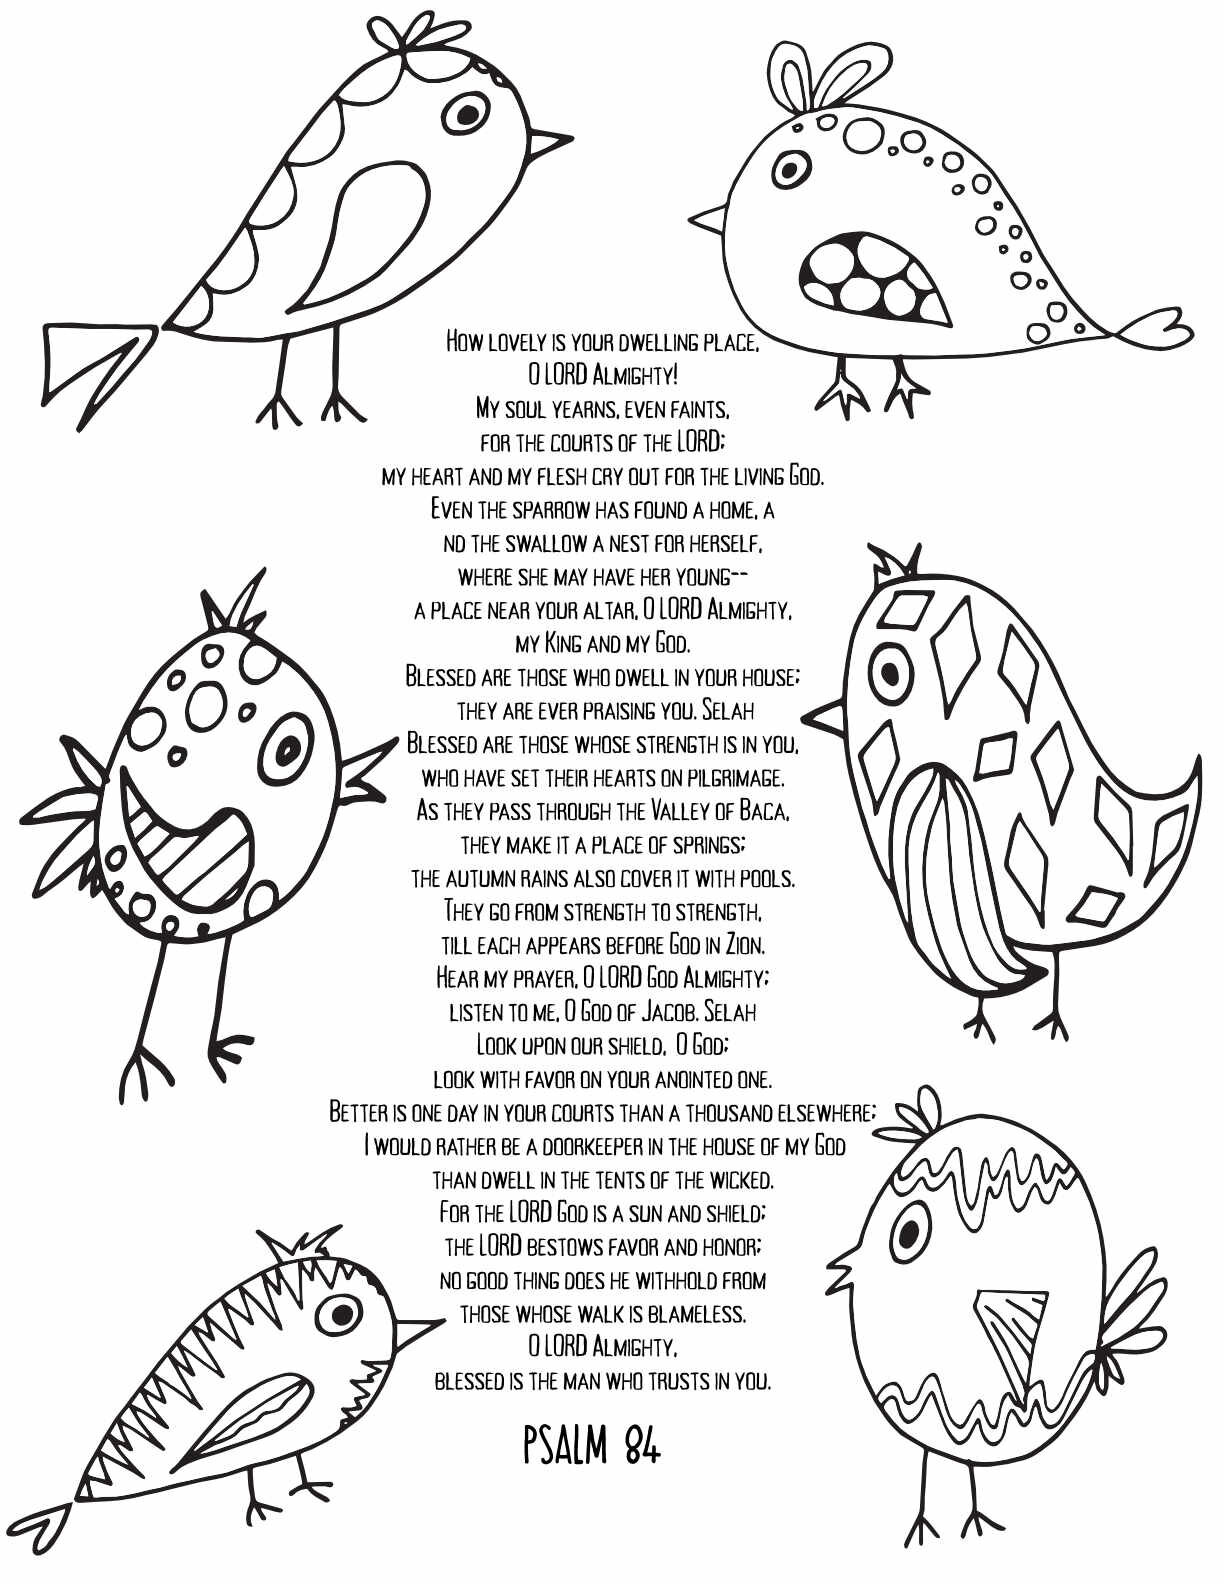 10 Free Printable Psalm Coloring Pages - Download and Color Adult Scripture - Psalm 84CLICK HERE TO DOWNLOAD THIS PAGE FREE